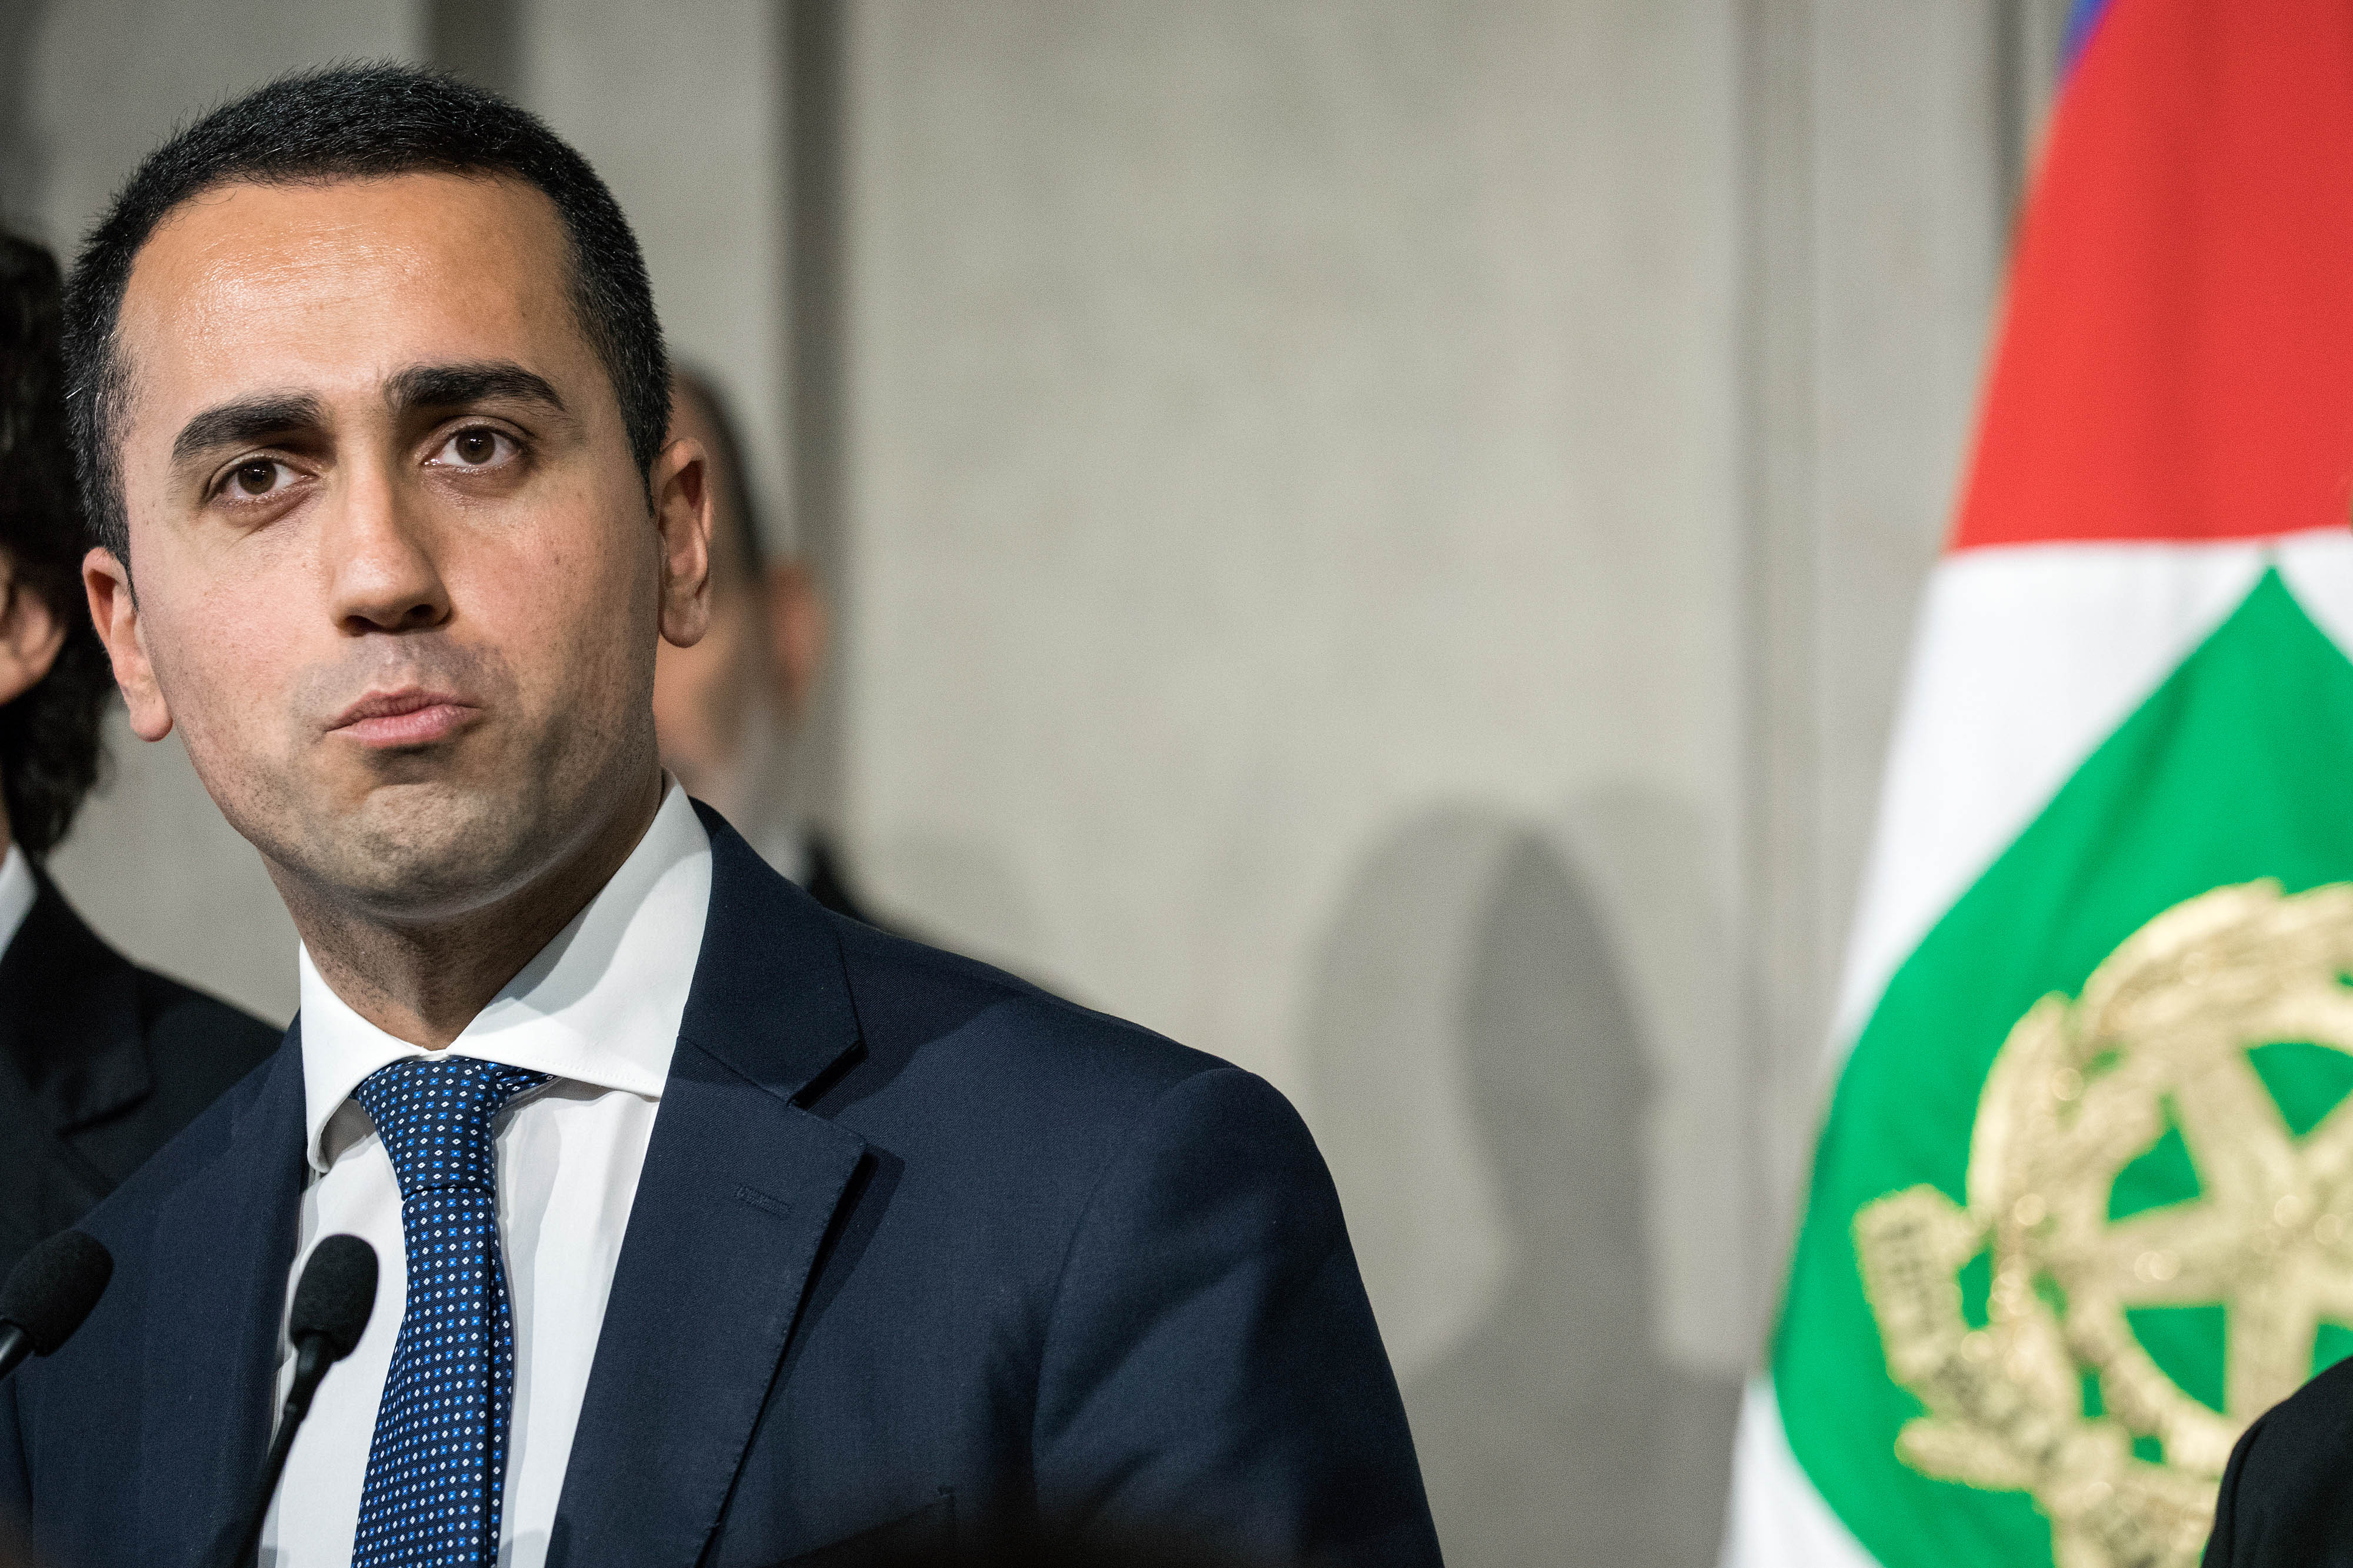 Luigi Di Maio, leader of the Five Star Movement, speaks at a news conference following a meeting with Italy's President Sergio Mattarella at the Quirinale Palace in Rome, Italy, on Monday, May 14, 2018. (Bloomberg—Bloomberg via Getty Images)